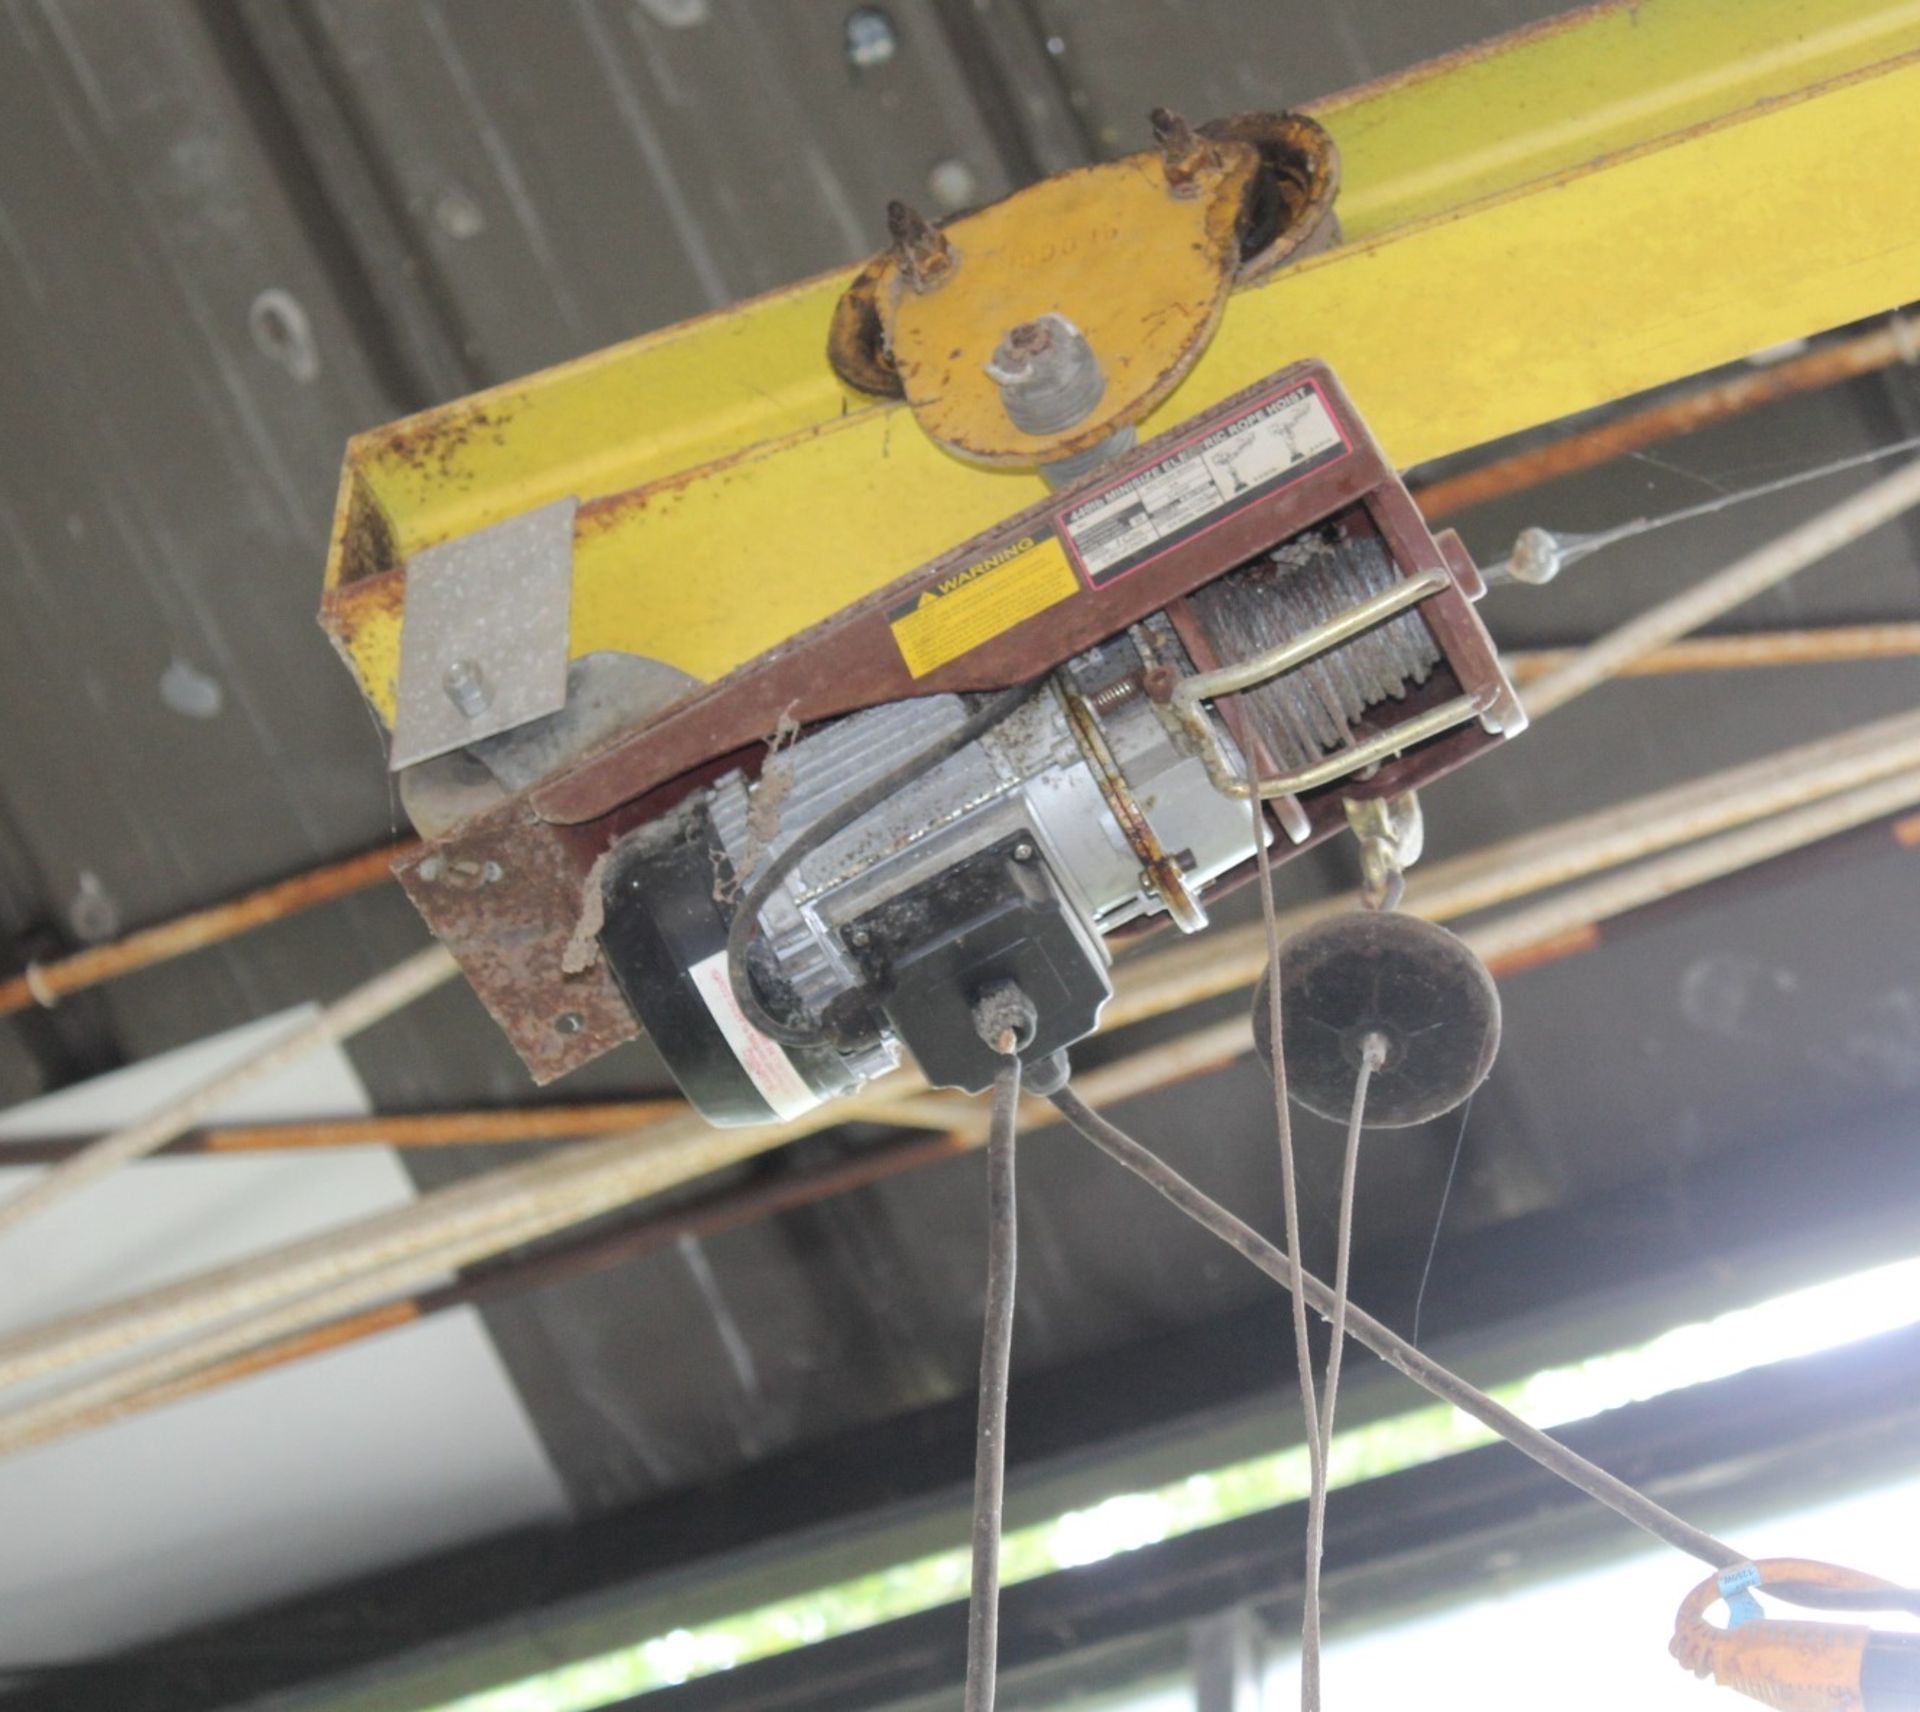 Northern Industrial Crane 440 LB Mini-Sized Electric Rope Hoist. Buyer Responsible for Removal. - Image 2 of 2